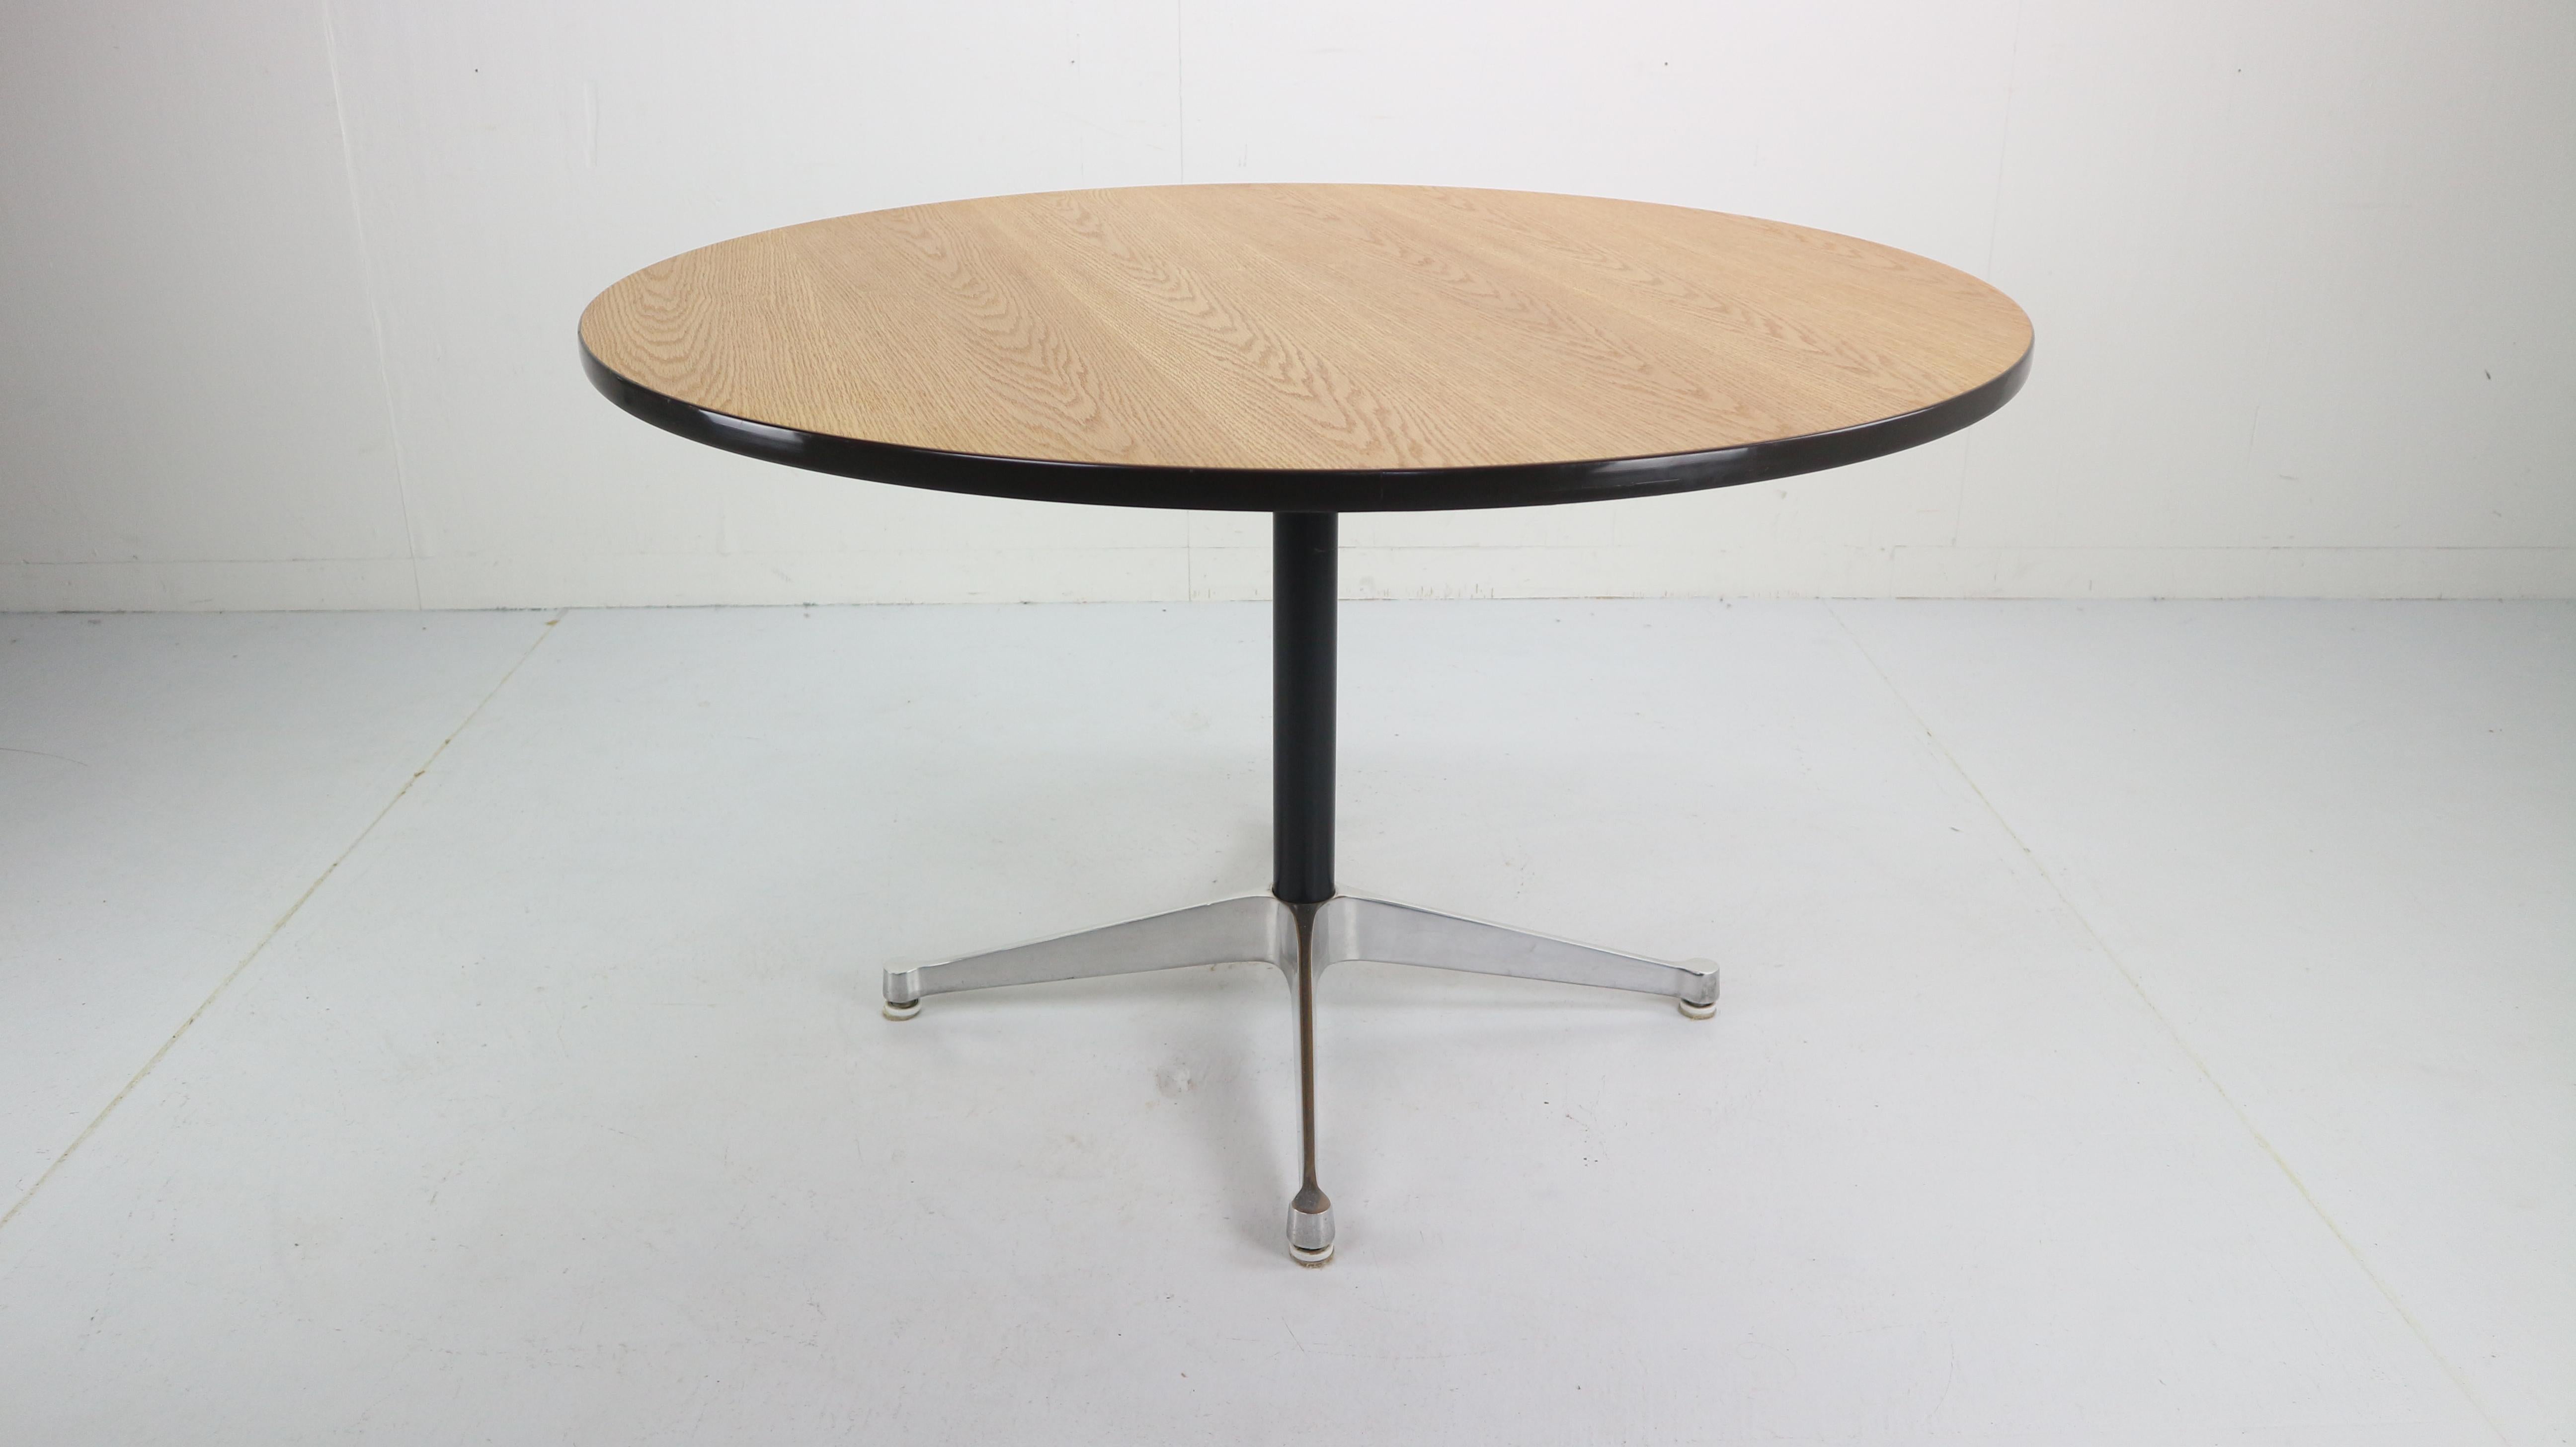 Charles and Ray Eames had ideas about making a better world, one in which things were designed to bring greater pleasure to our lives. The versatile Eames Universal Table (1960) is a durable solution for residential and commercial settings, such as